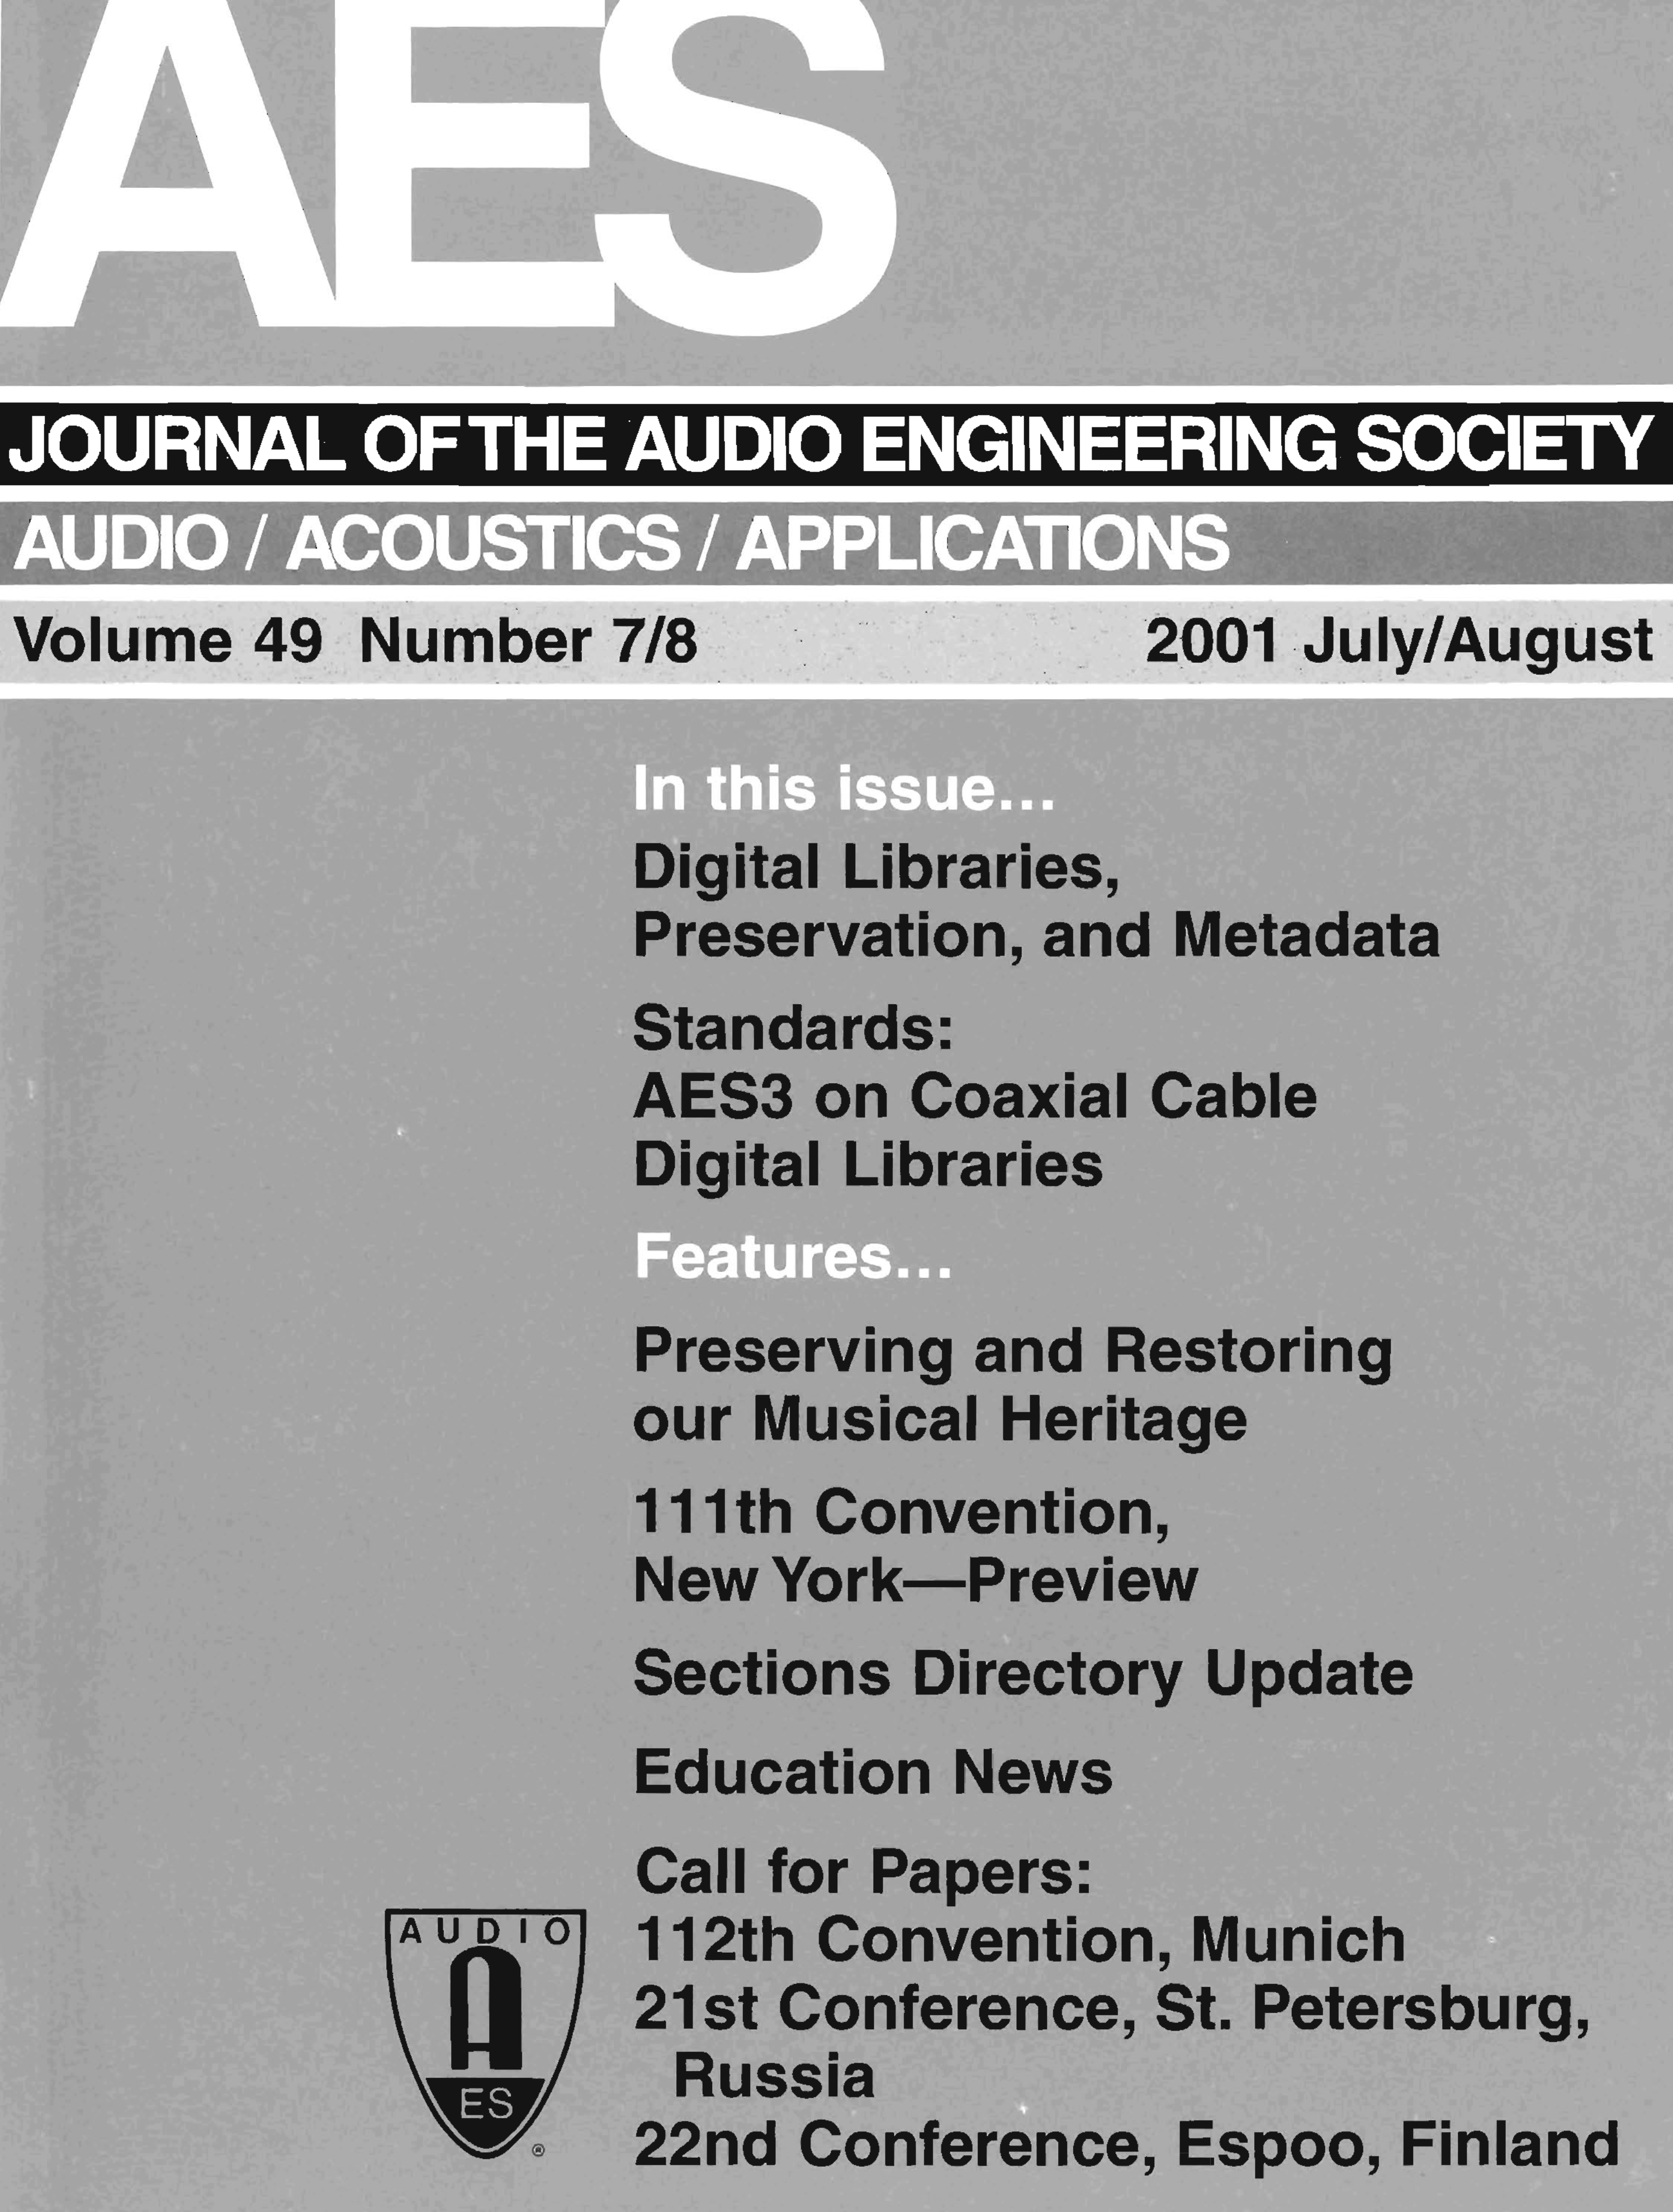 AES E-Library » Complete Journal: Volume 49 Issue 7/8